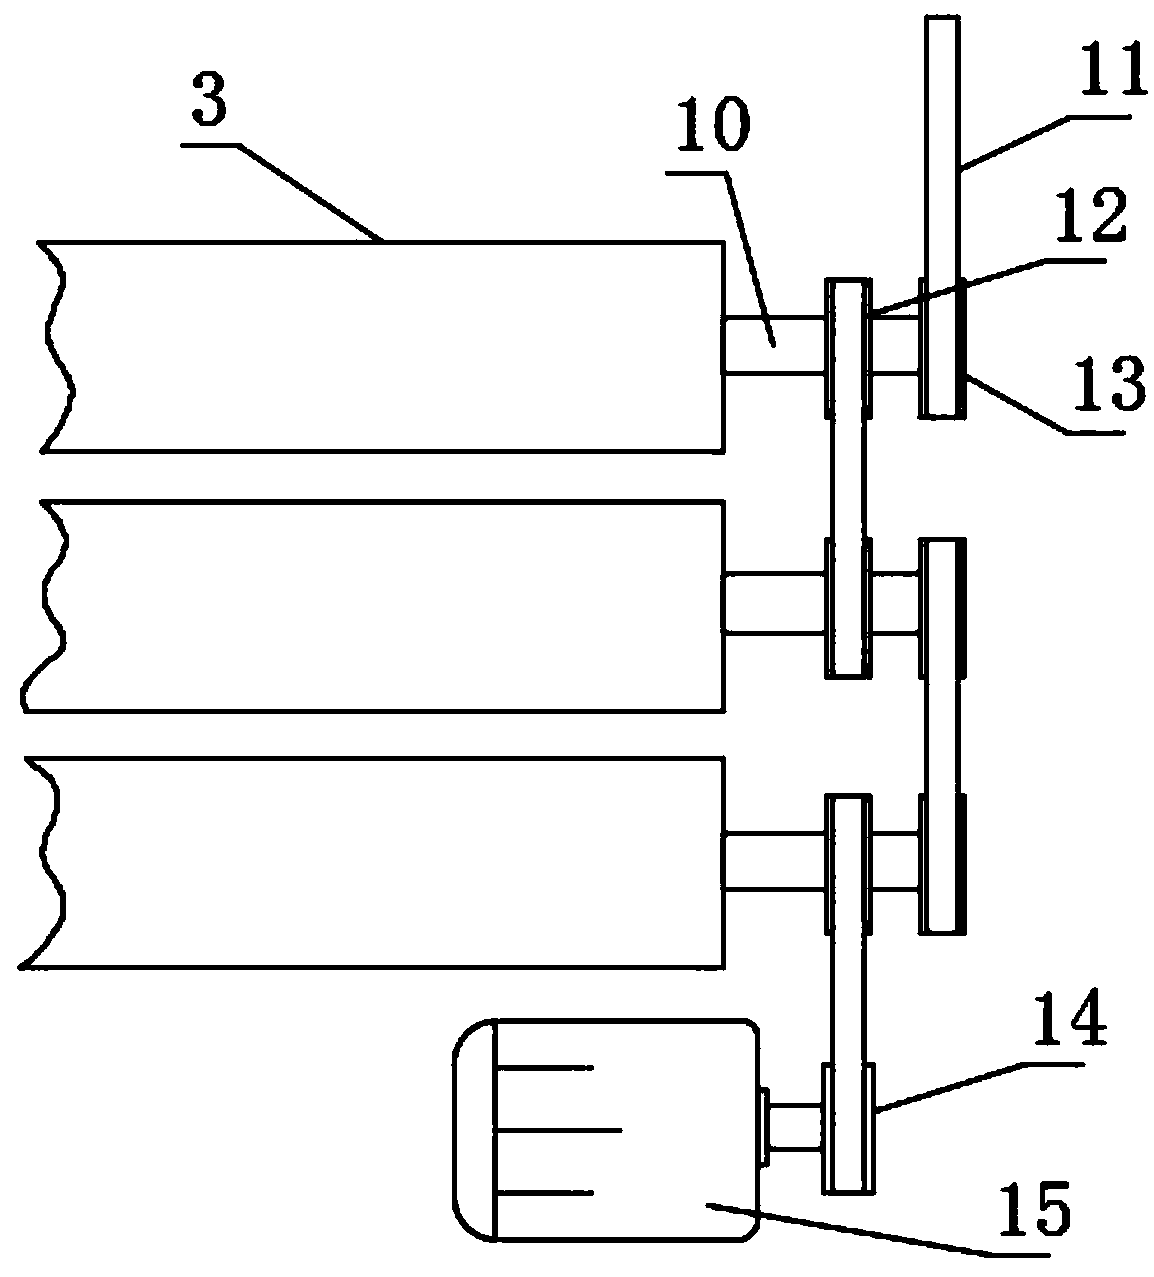 Feeding mechanism of full-automatic packaging machine and adjusting assembly